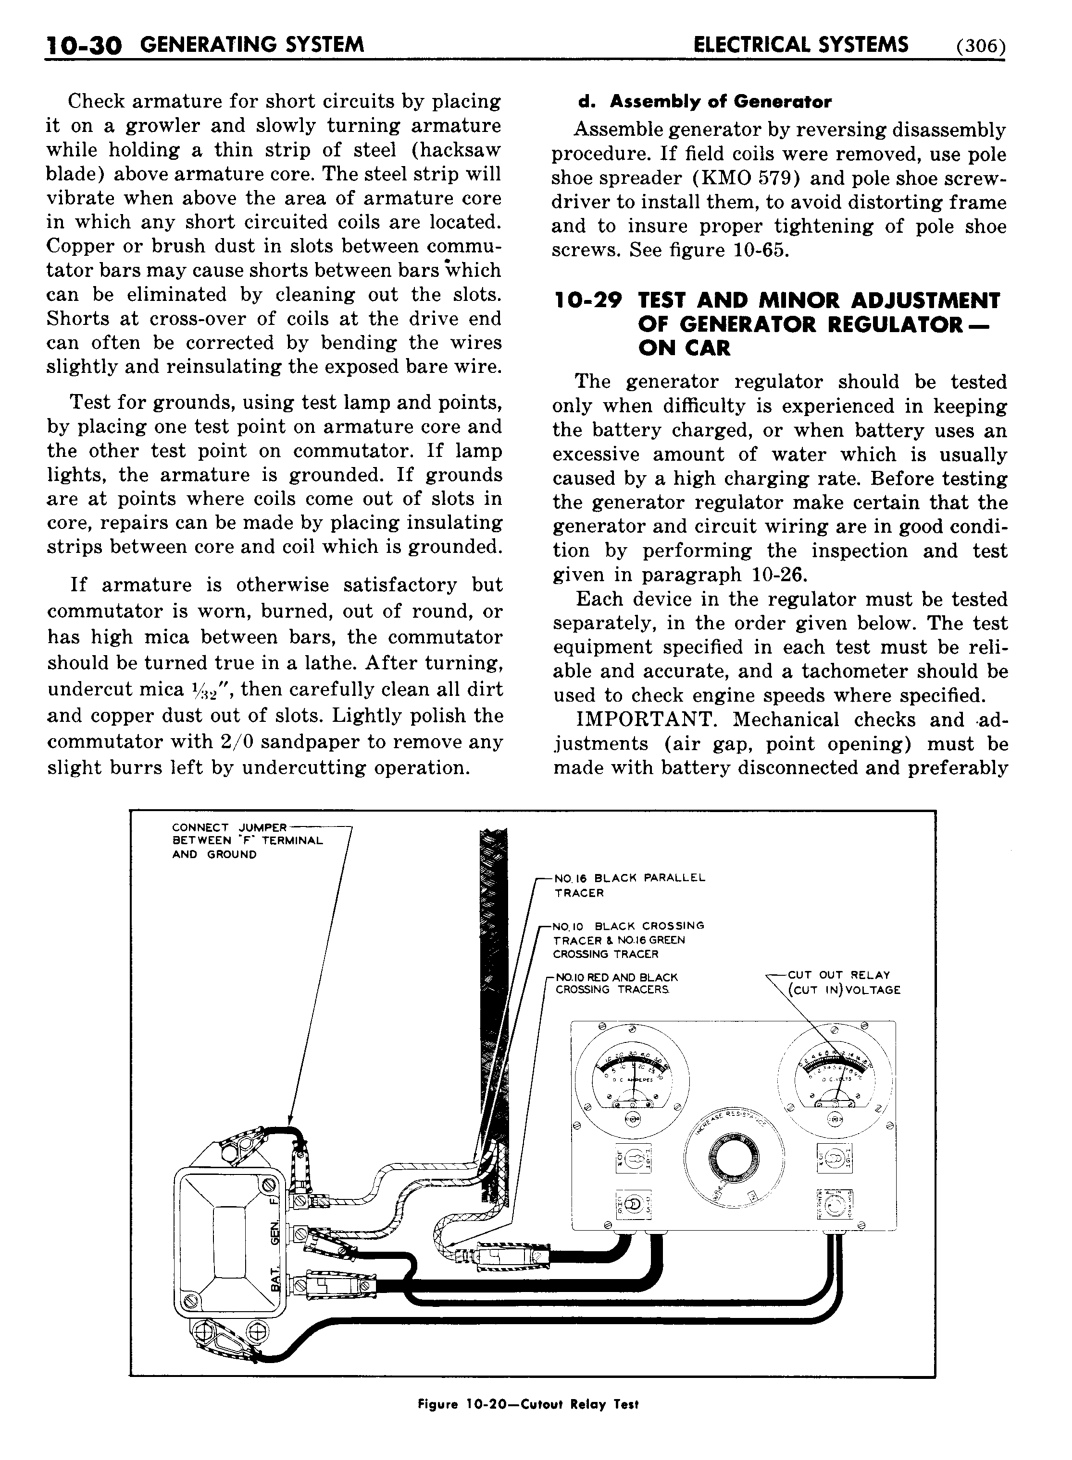 n_11 1948 Buick Shop Manual - Electrical Systems-030-030.jpg